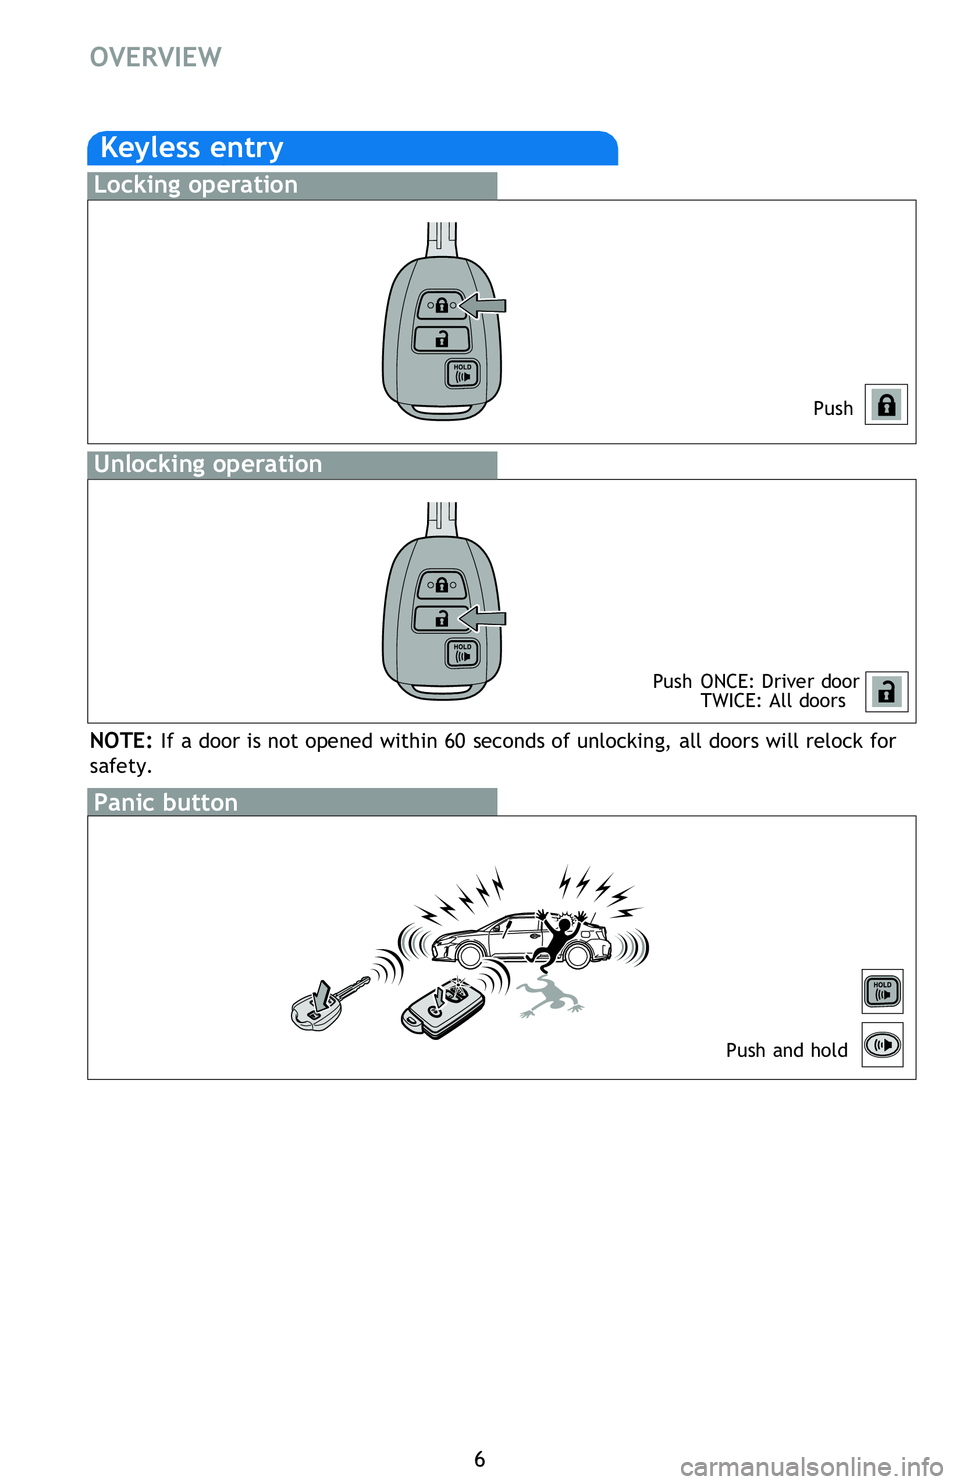 TOYOTA tC 2015  Owners Manual (in English) 6
OVERVIEW
Keyless entry
Push
Push ONCE: Driver door TWICE: All doors
Locking operation
Unlocking operation
Panic button
Push and hold
NOTE: If a door is not opened within 60 seconds of unlocking, all